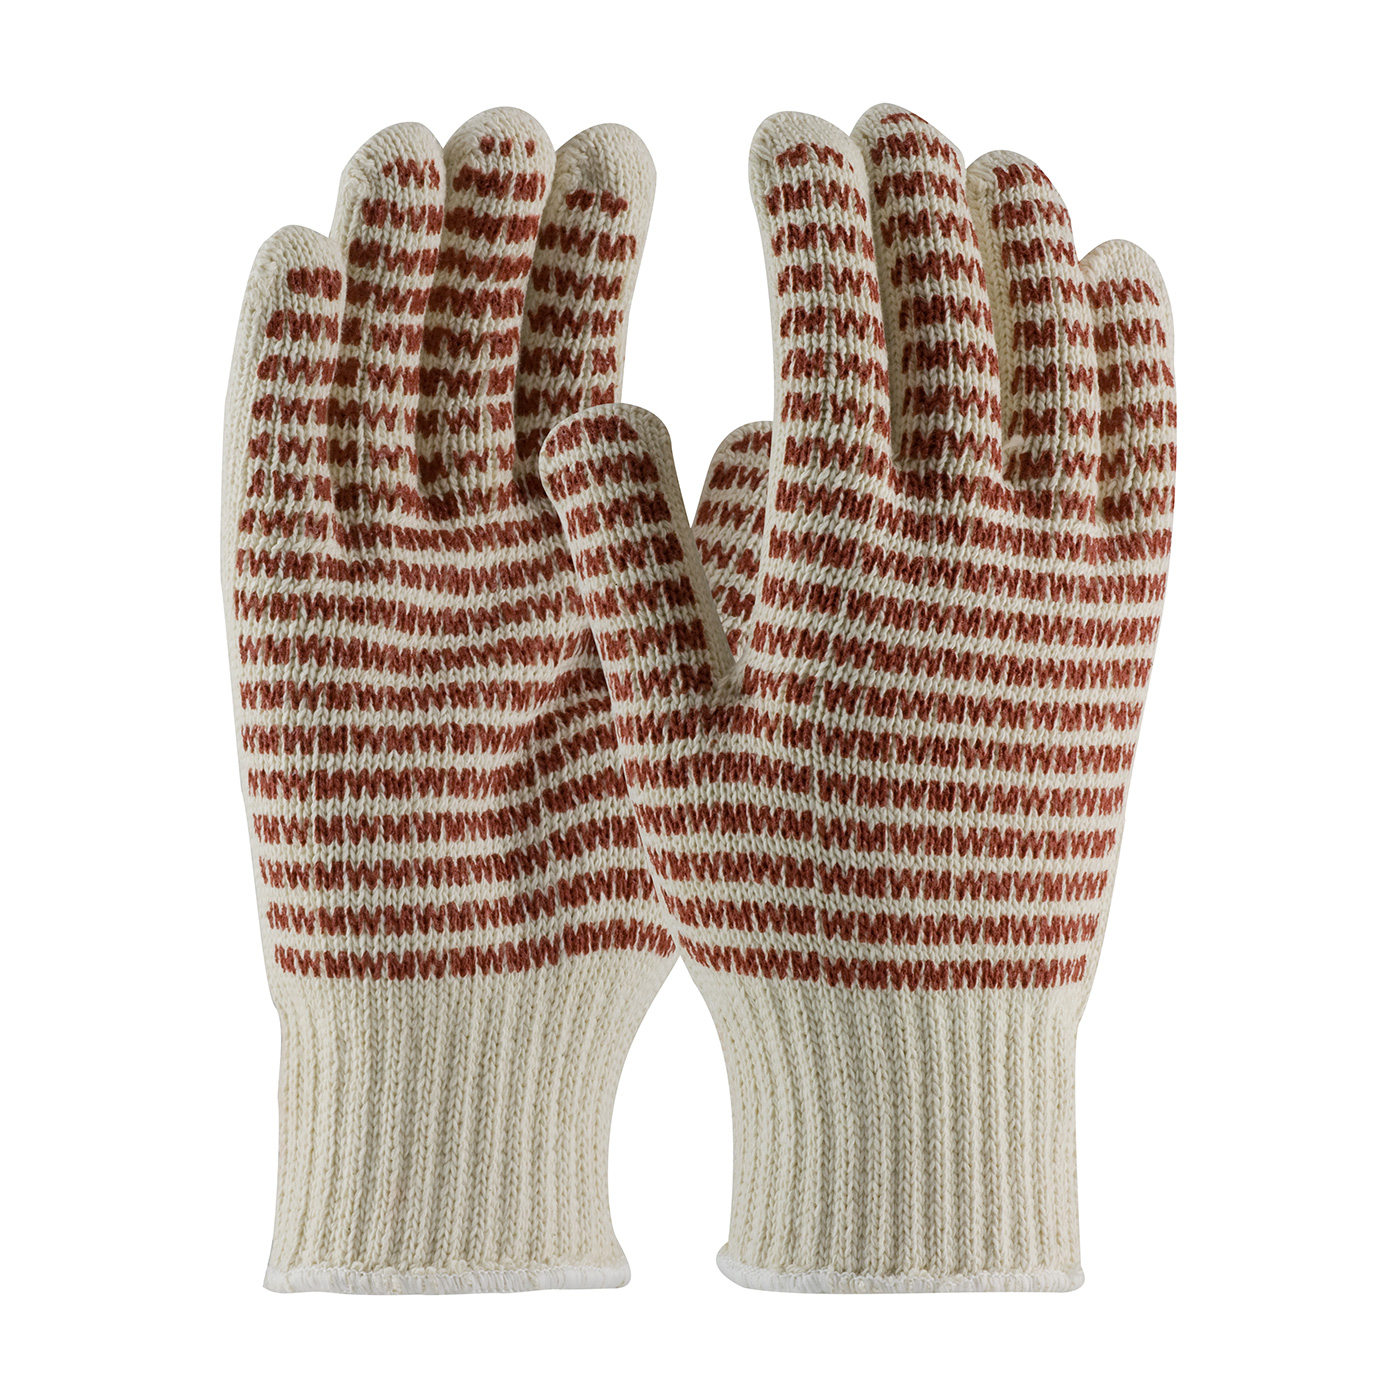 PIP®  Seamless Knit Cotton / Polyester Glove with Double-sided EverGrip™ Nitrile Coating #38-720